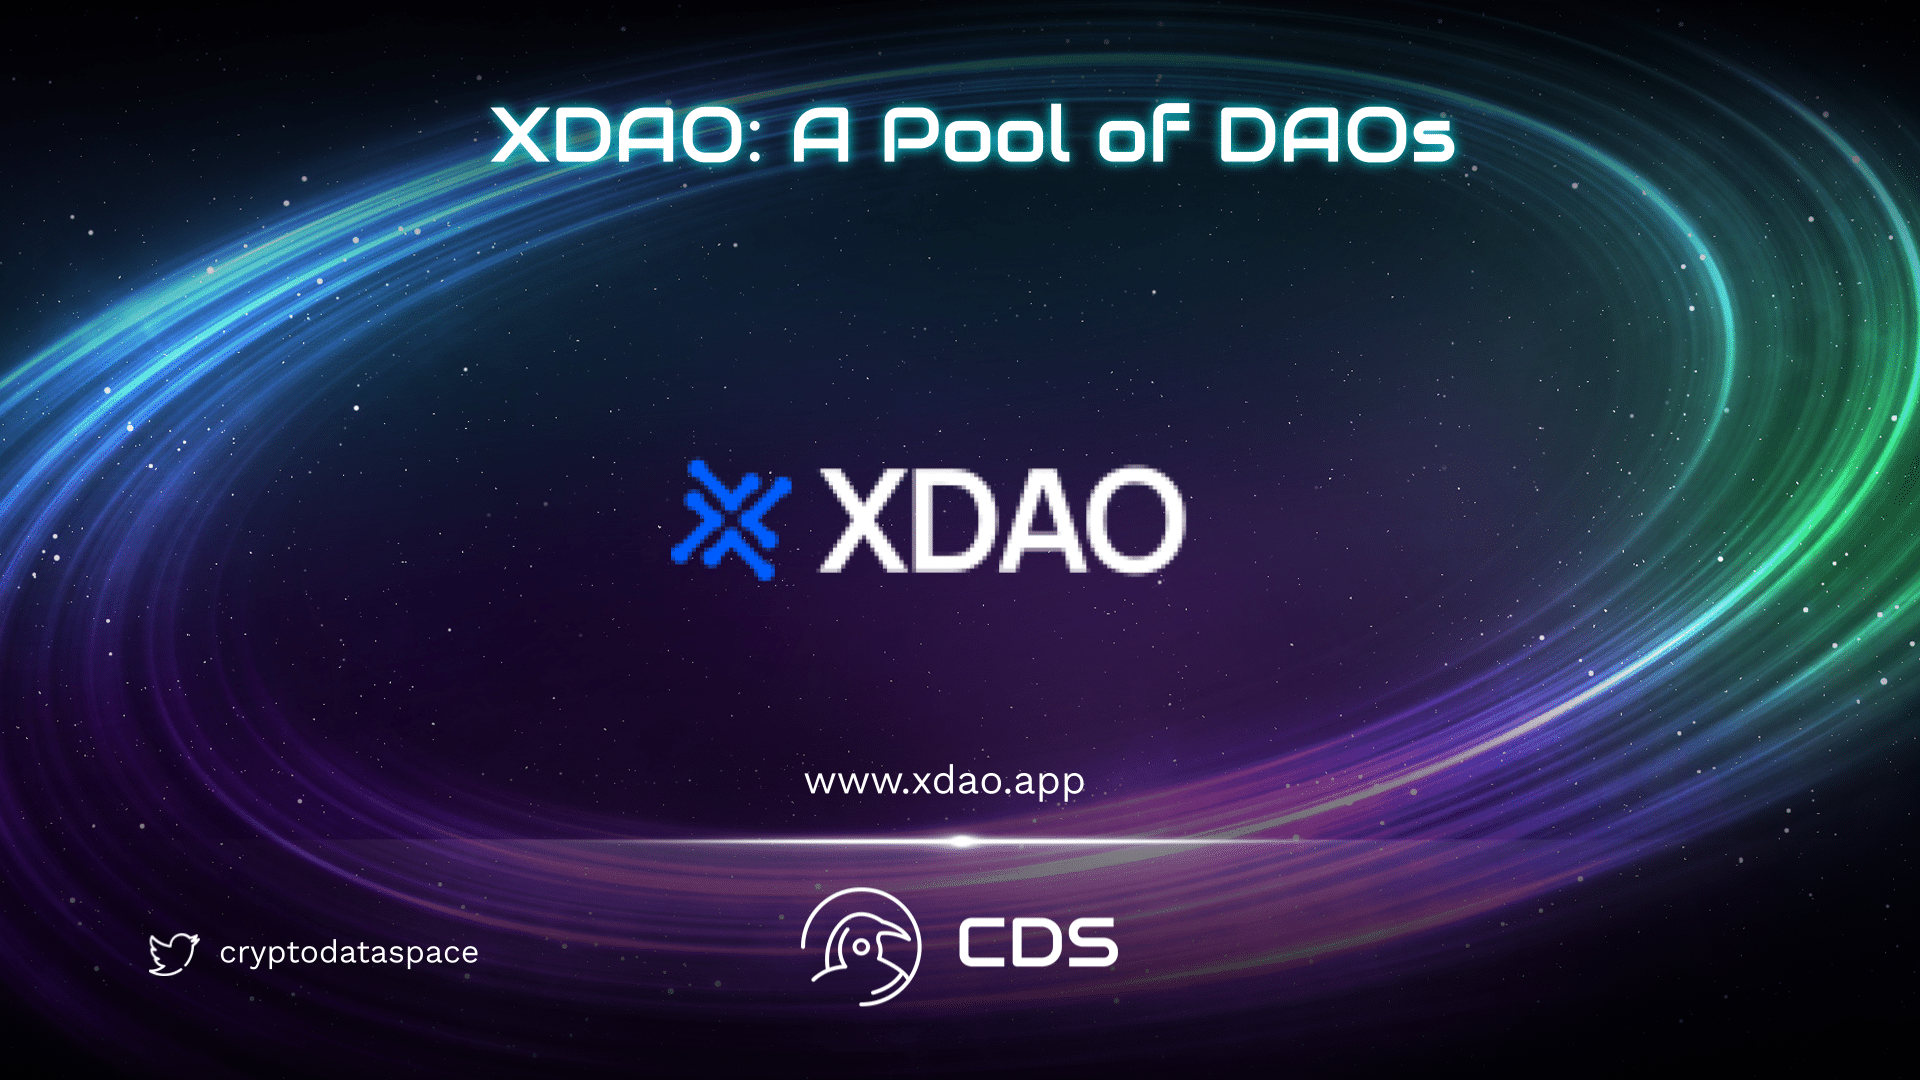 xdap a pool of daos